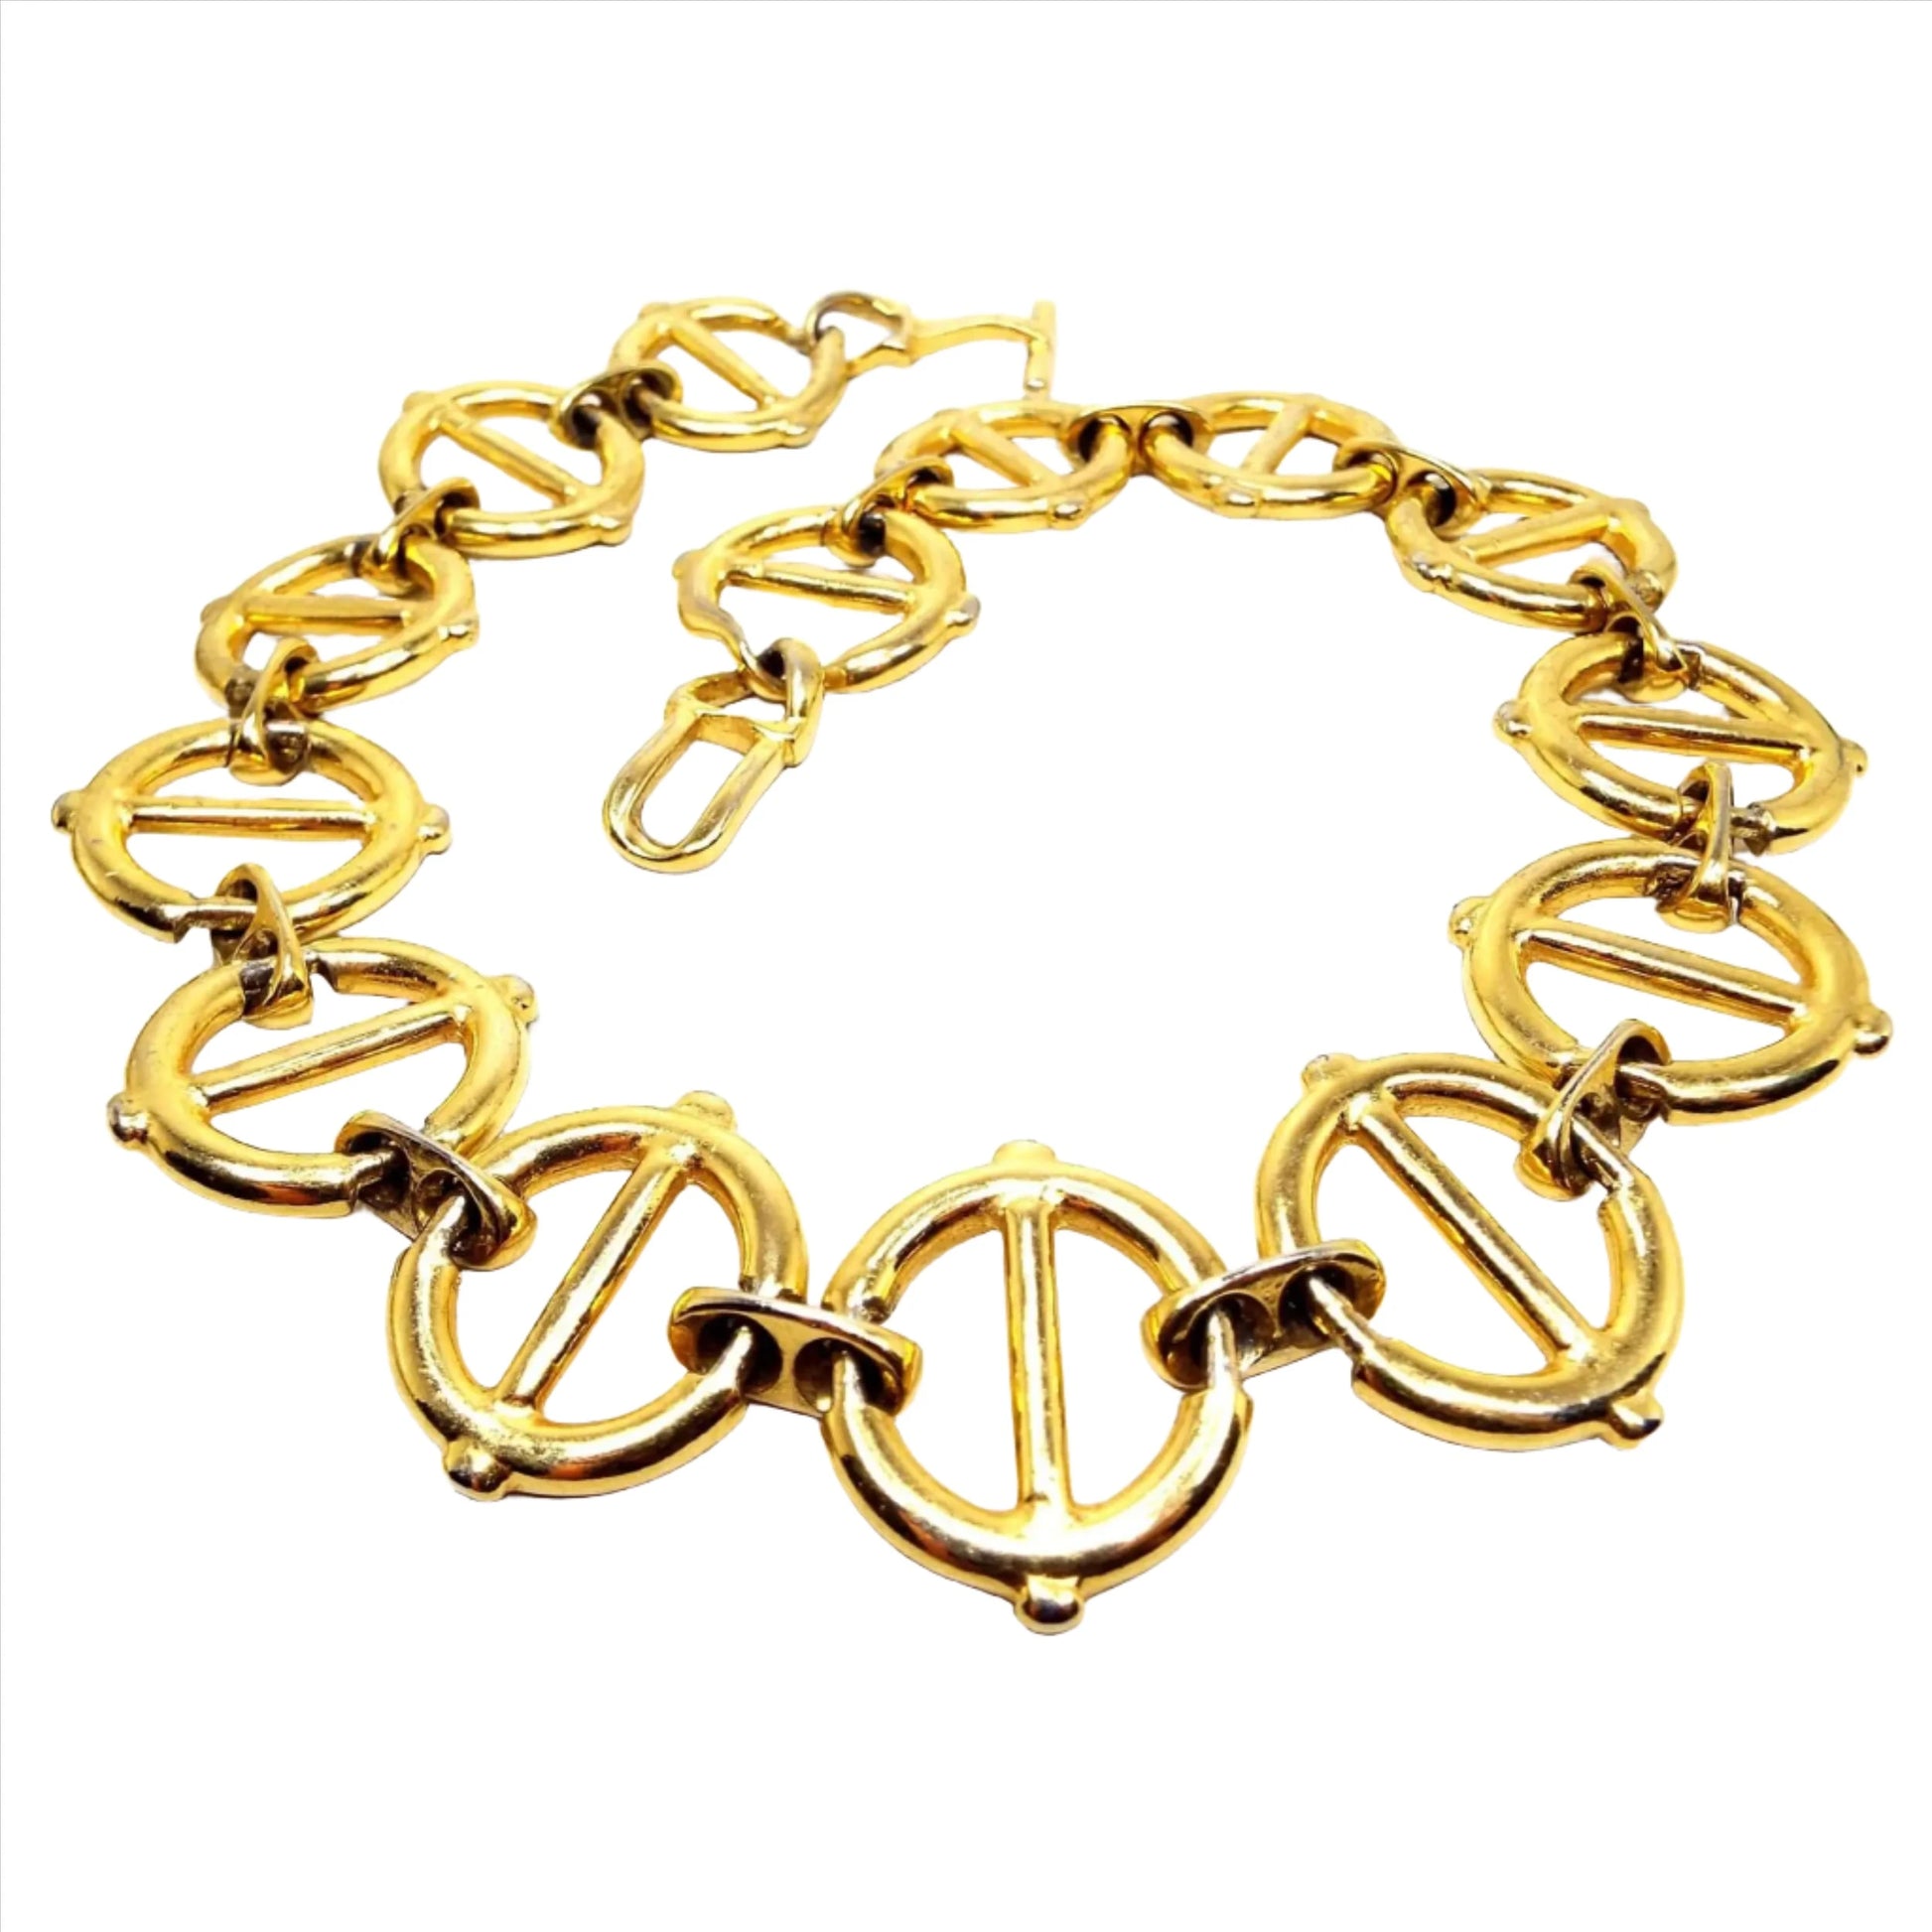 Top view of the retro vintage large wide link necklace. The metal is gold tone in color. The links are large and round with a bar through the middle and they are held together by smaller sized oval links with holes. There is a large toggle clasp at the end.